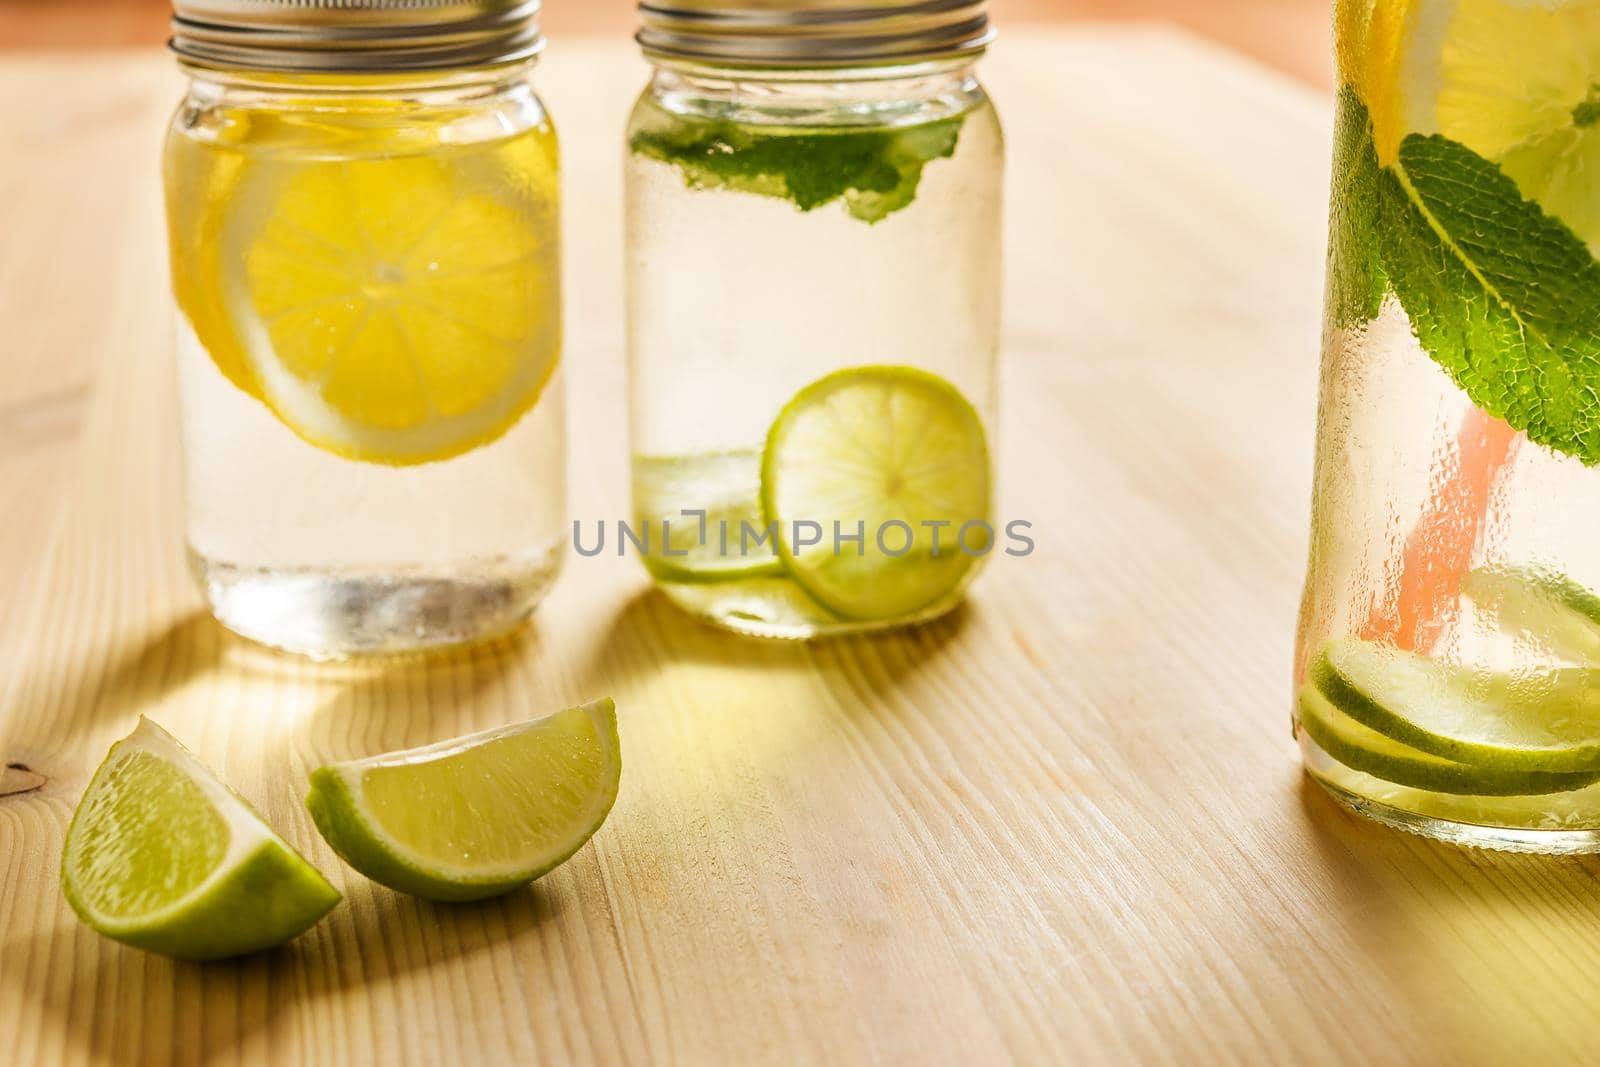 glass jar full of water with ice, slices of lemon and mint leaves, all is on a wooden table